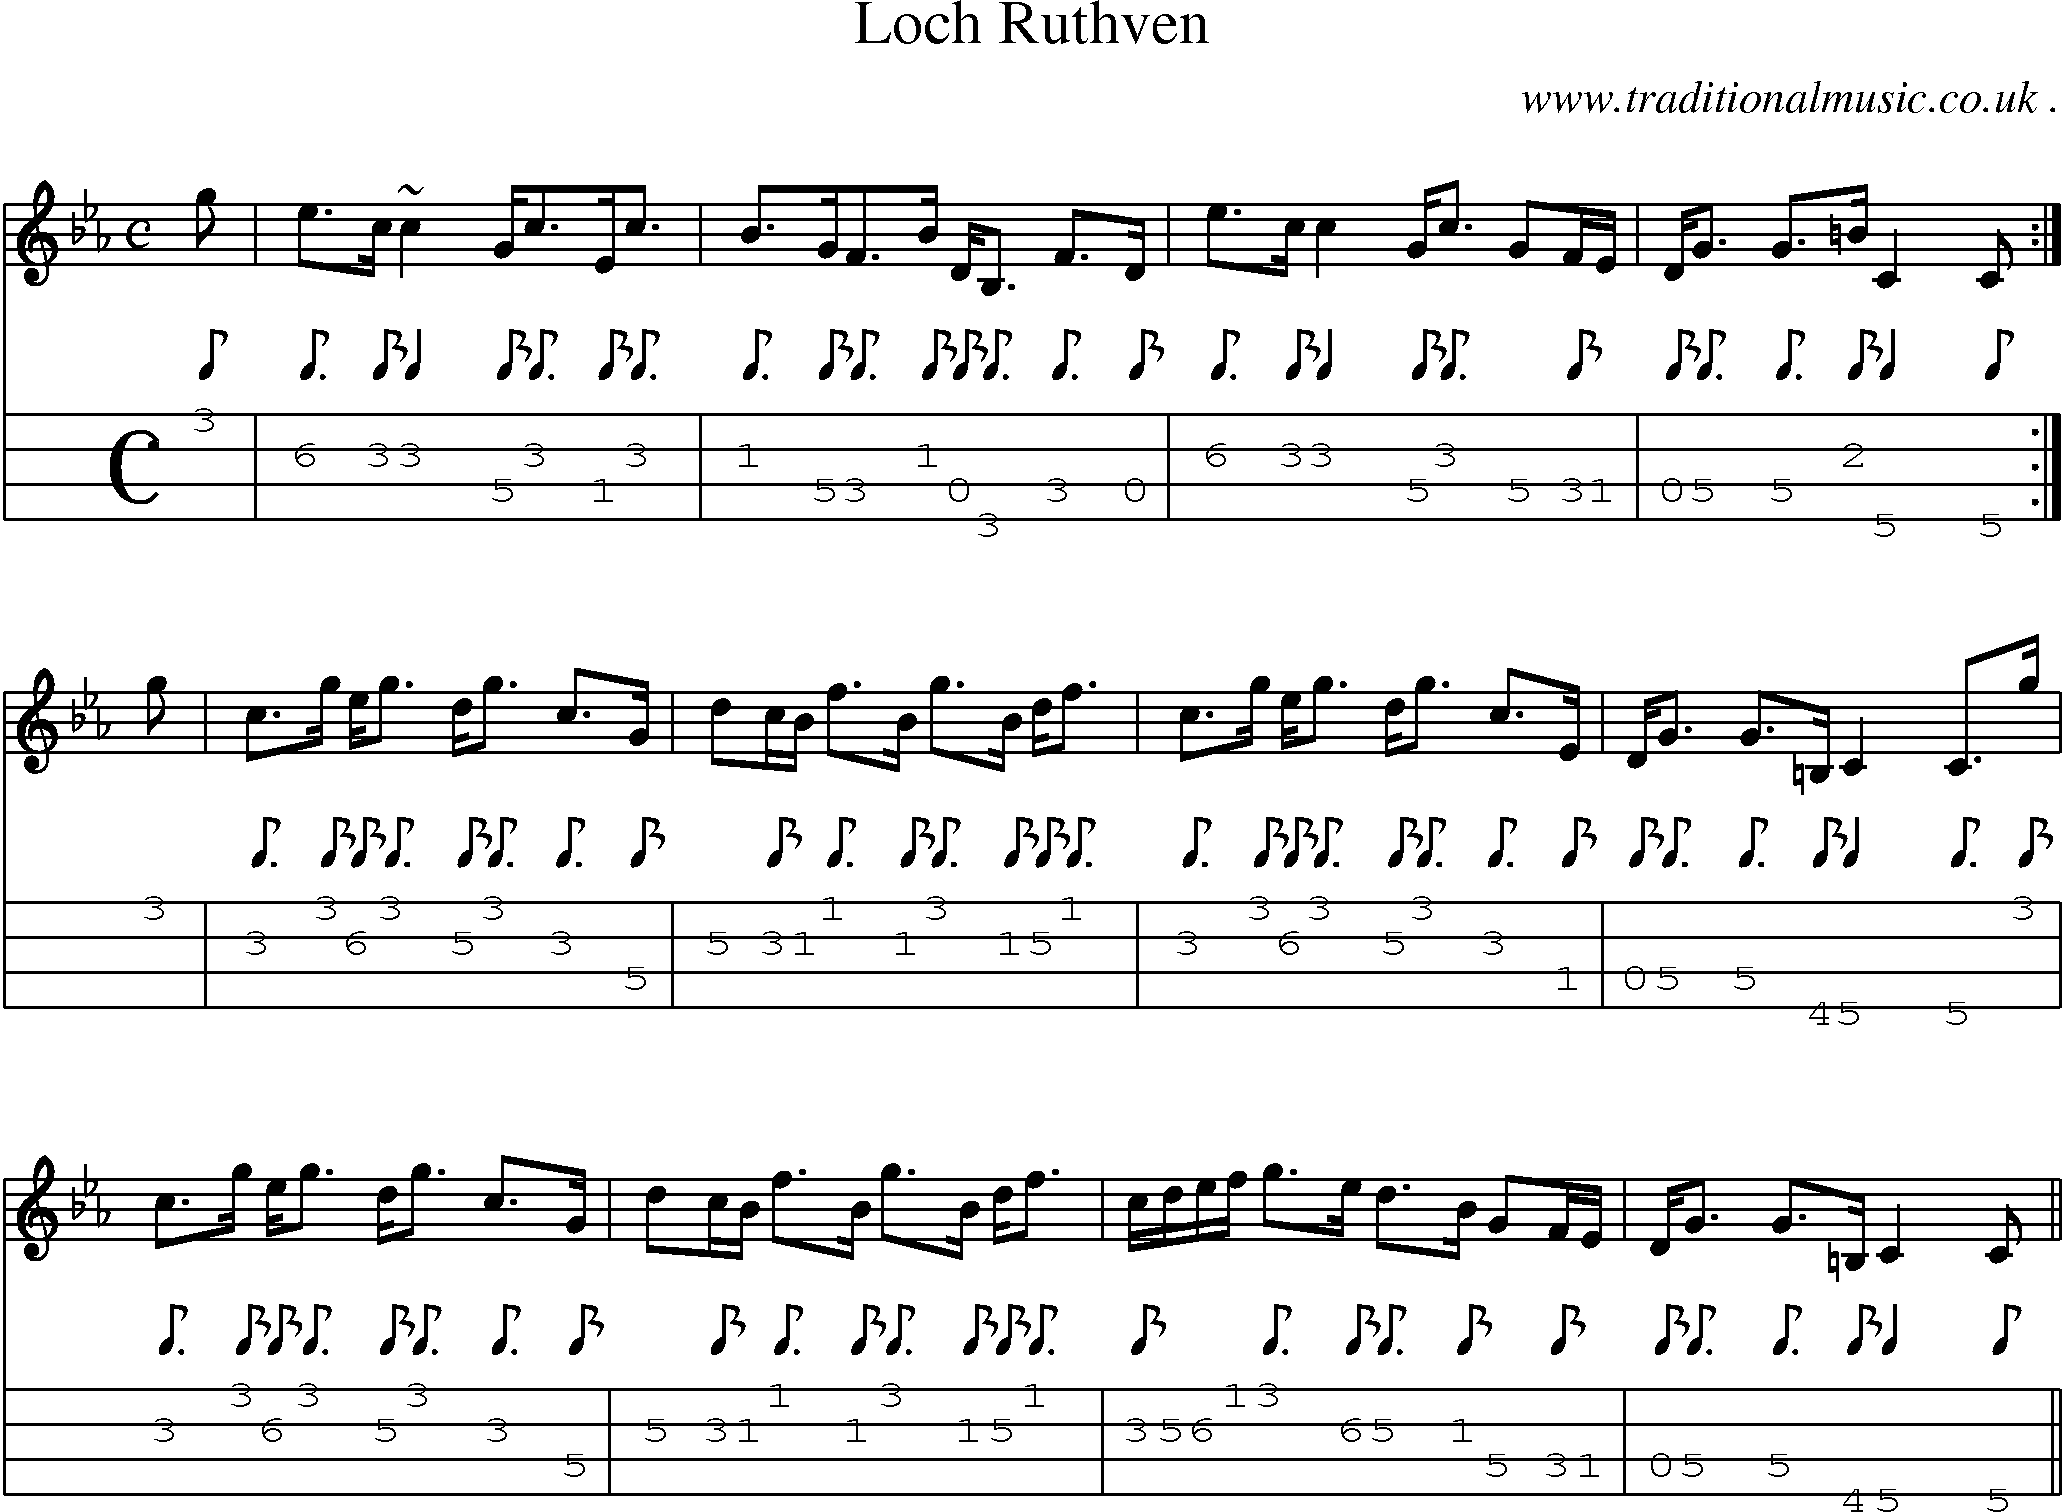 Sheet-music  score, Chords and Mandolin Tabs for Loch Ruthven